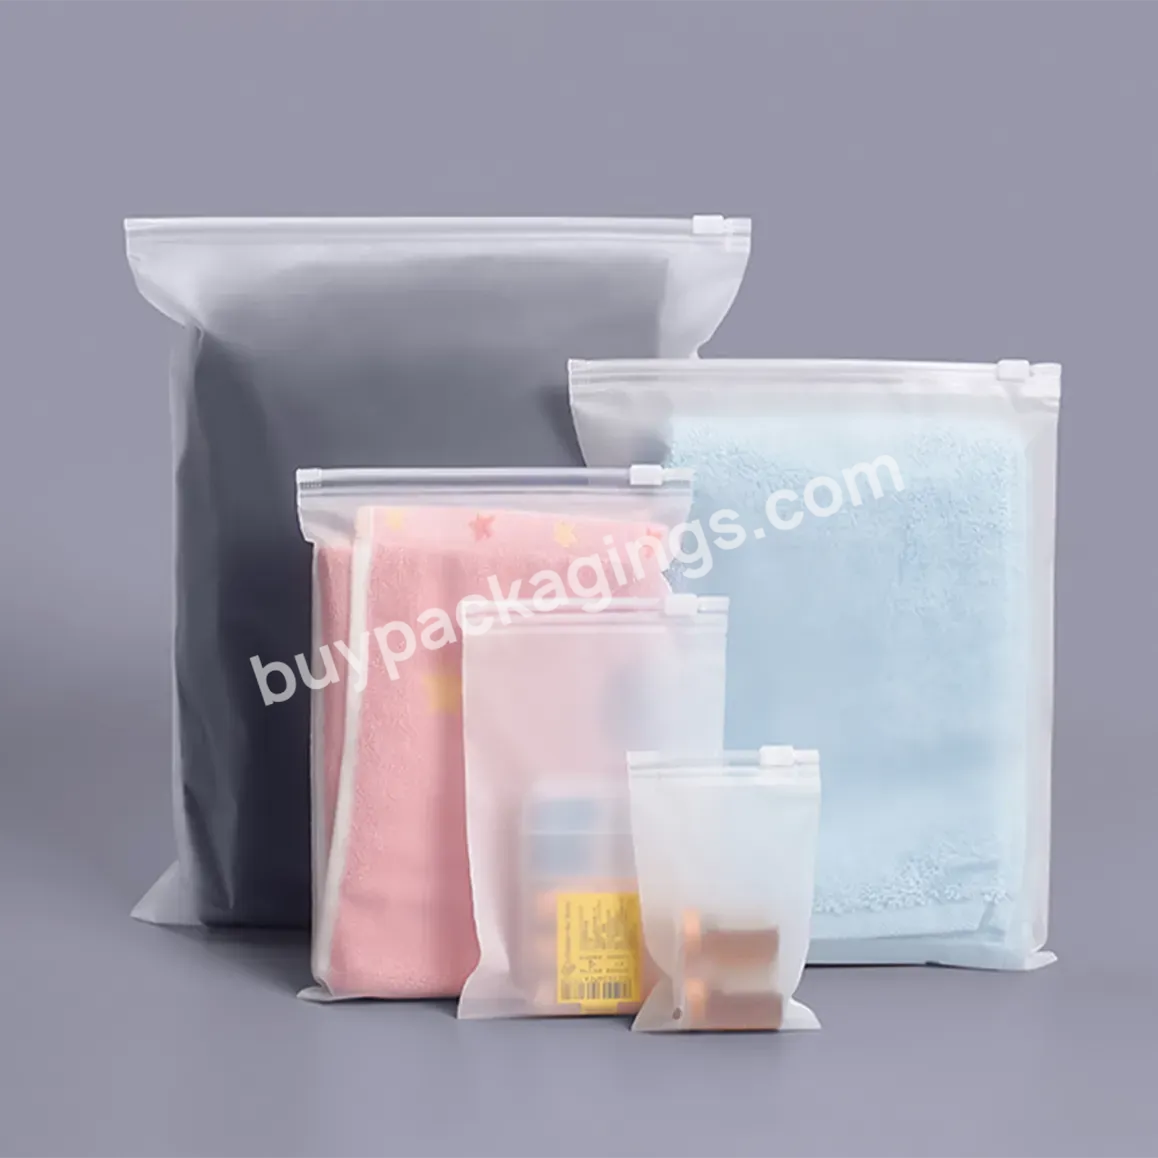 Translucent 13x21cm Plastic Pouches Frosted Plastic T Shirt Packaging Zipper Bag - Buy Translucent 13x21cm Plastic Pouches,Frosted Plastic T Shirt Packaging Zipper Bag,Clear Plastic Shirt Packaging Bags.